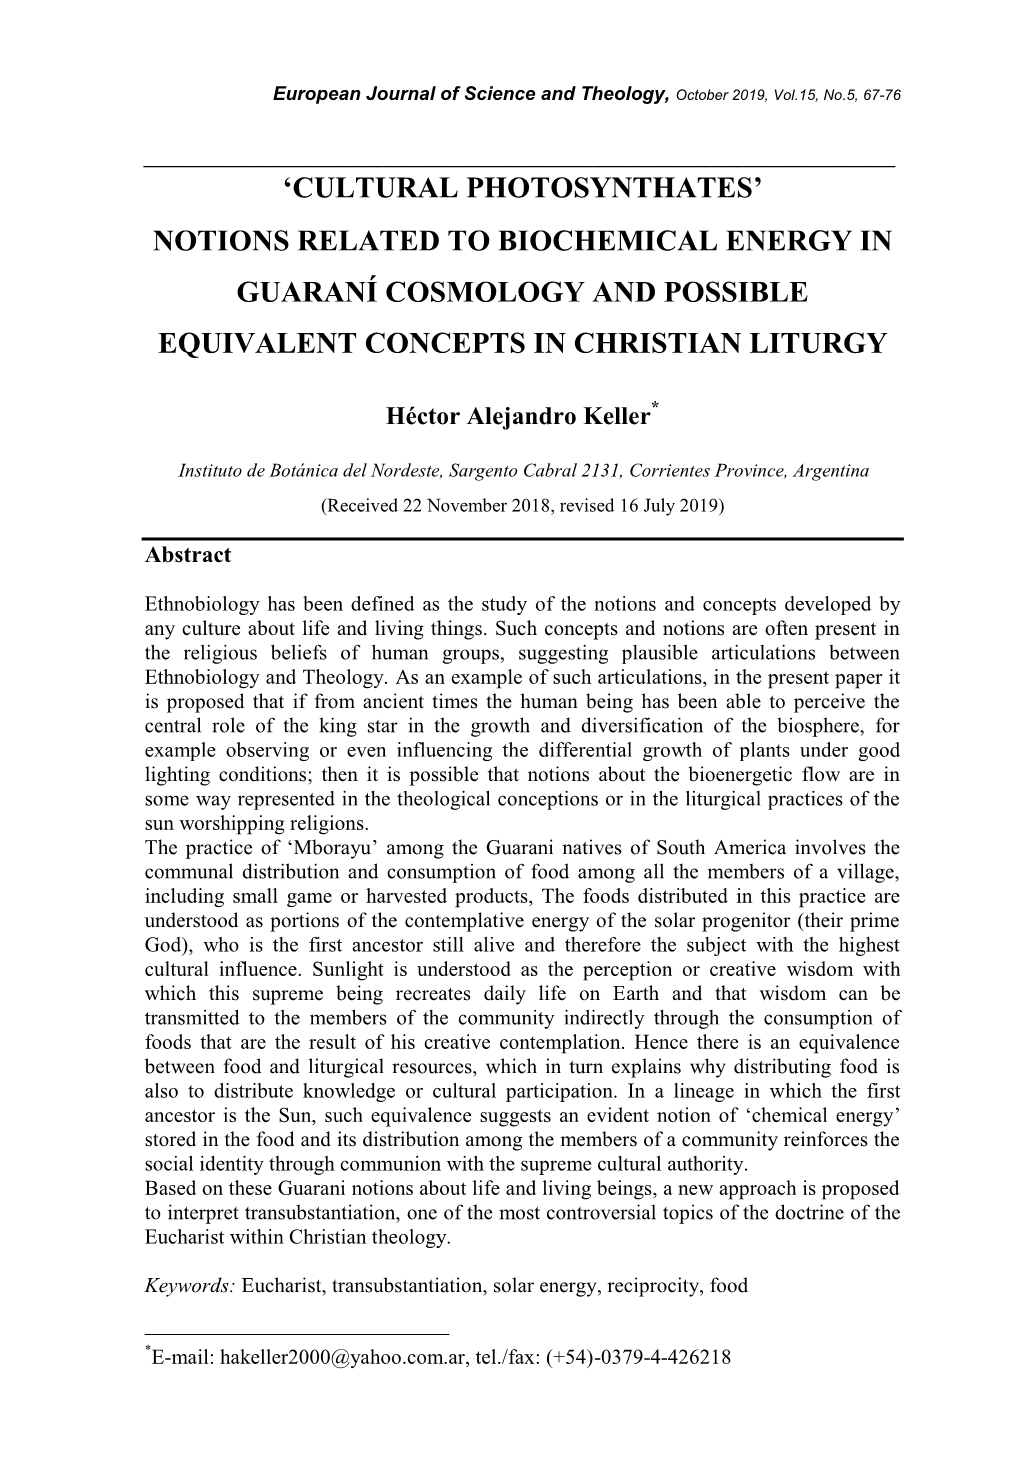 Notions Related to Biochemical Energy in Guaraní Cosmology and Possible Equivalent Concepts in Christian Liturgy